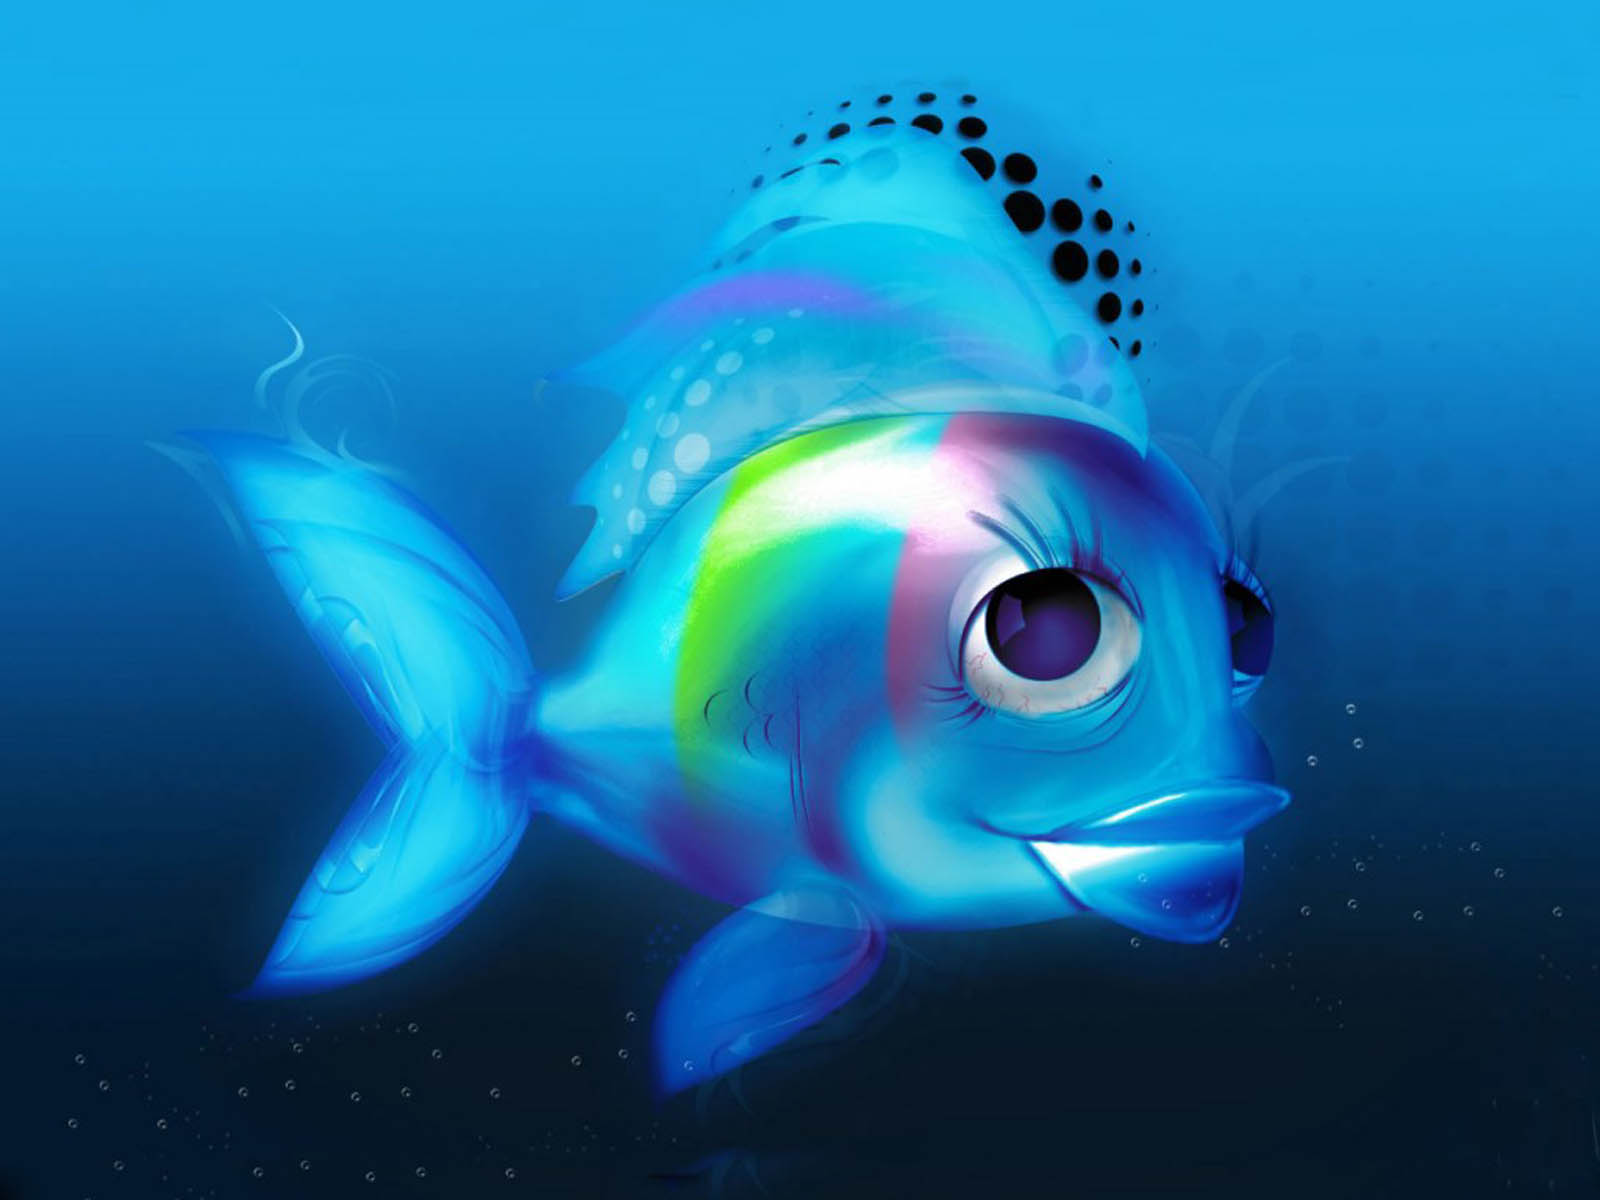 Tag 3d Fish Wallpaper Image Photos Pictures And Background For